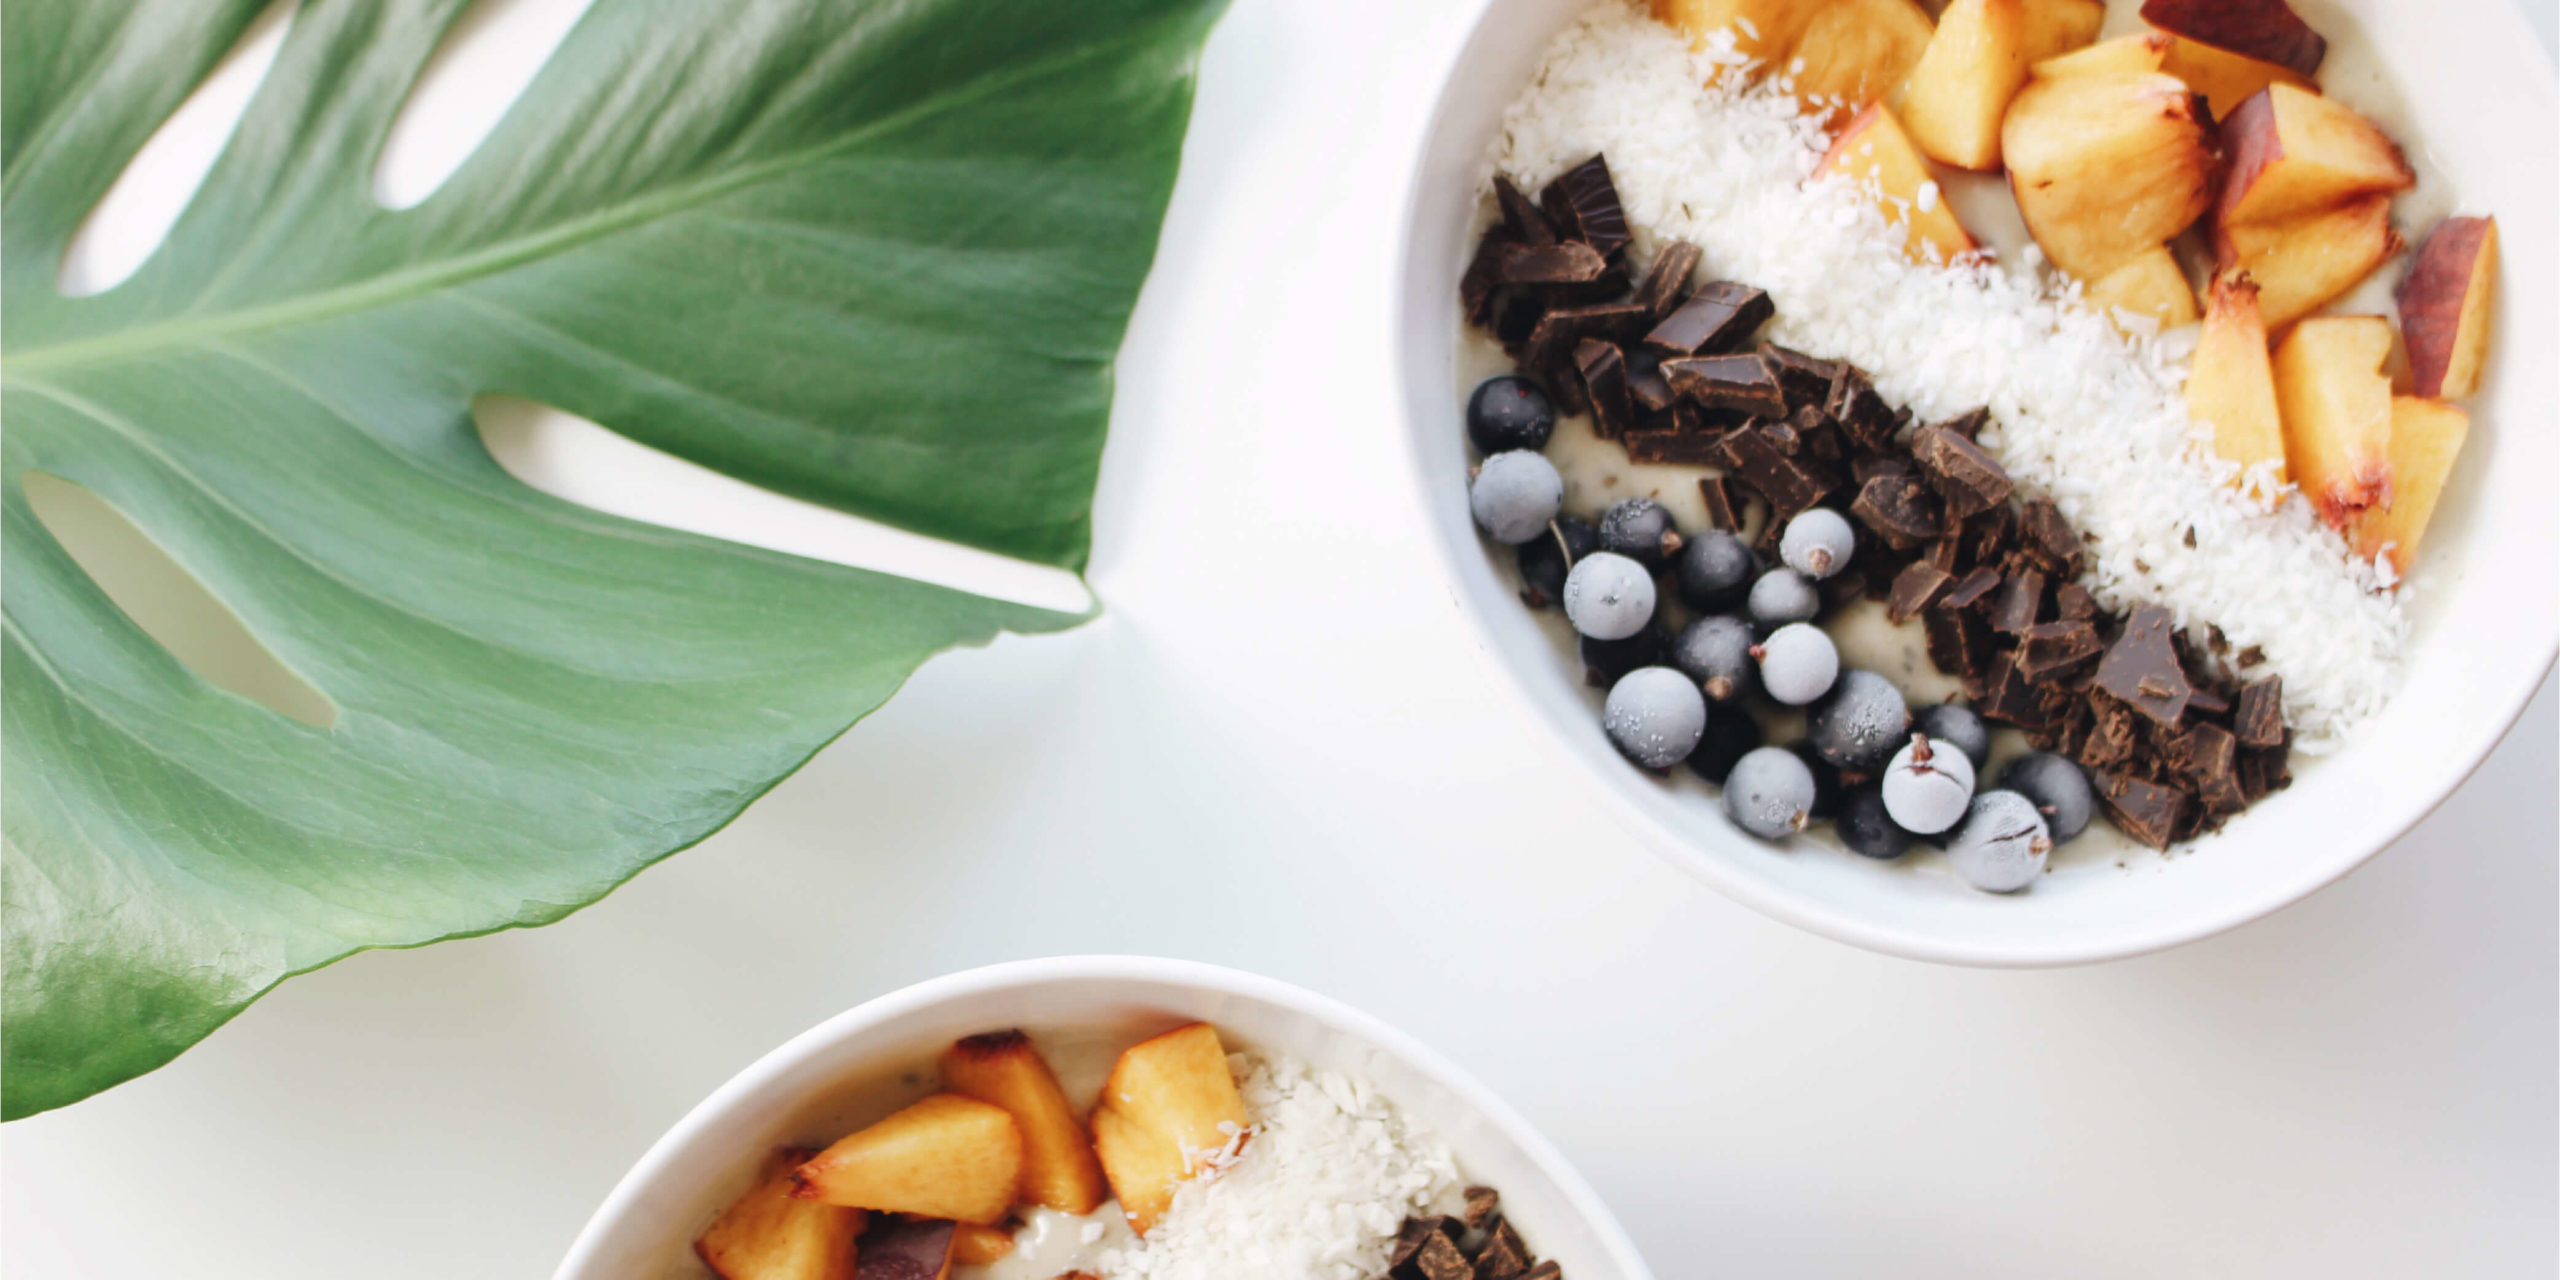 Monstera leaf beside smoothie bowls filled with frozen chopped peach, shredded coconut, dark chocolate and blackcurrants